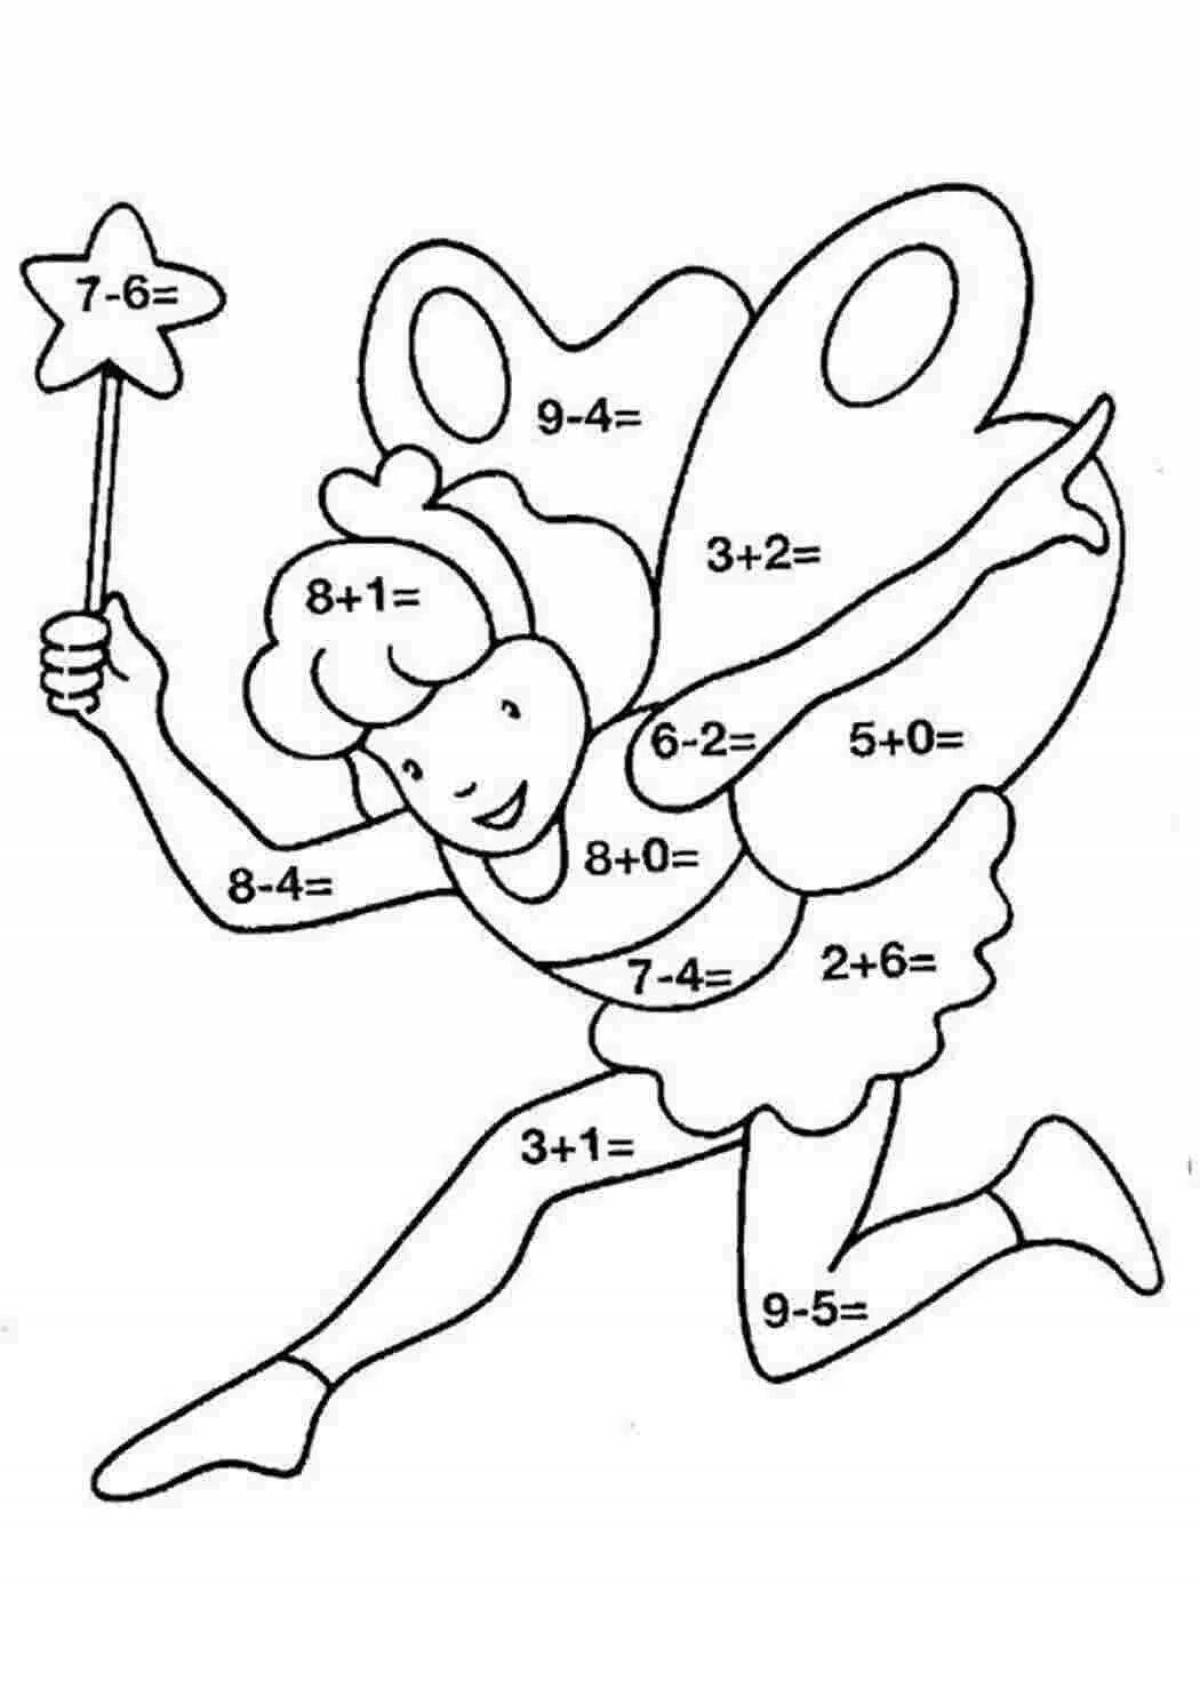 Coloring pages with creative math problems for children 6-7 years old